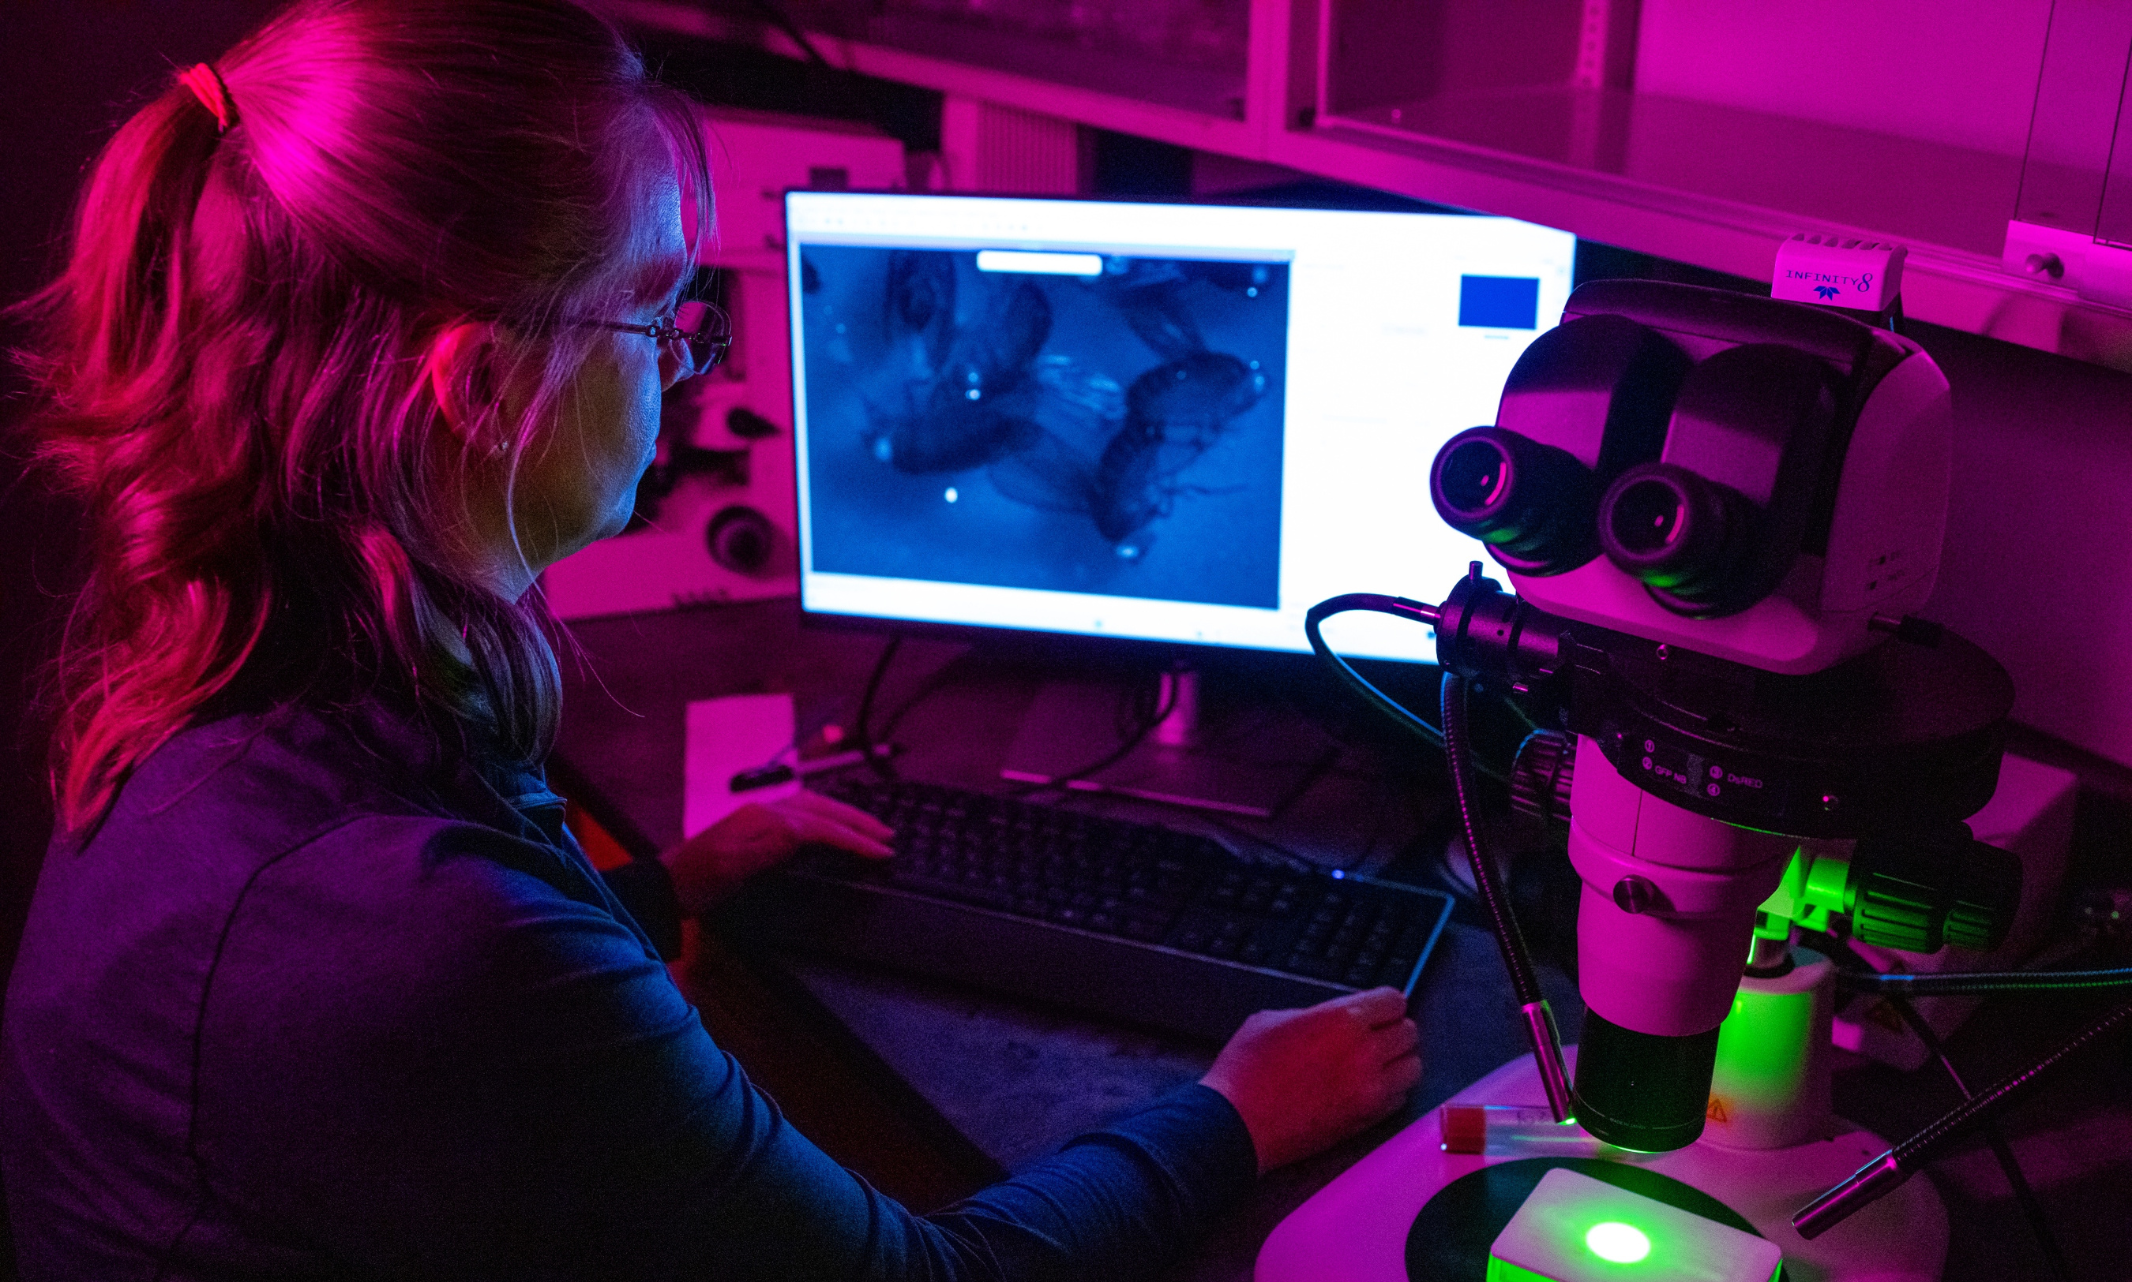 Maria Spletter, Ph.D., uses a high-powered microscope with four lasers to analyze four different components of the Drosophila fruit fly muscle cell at once.